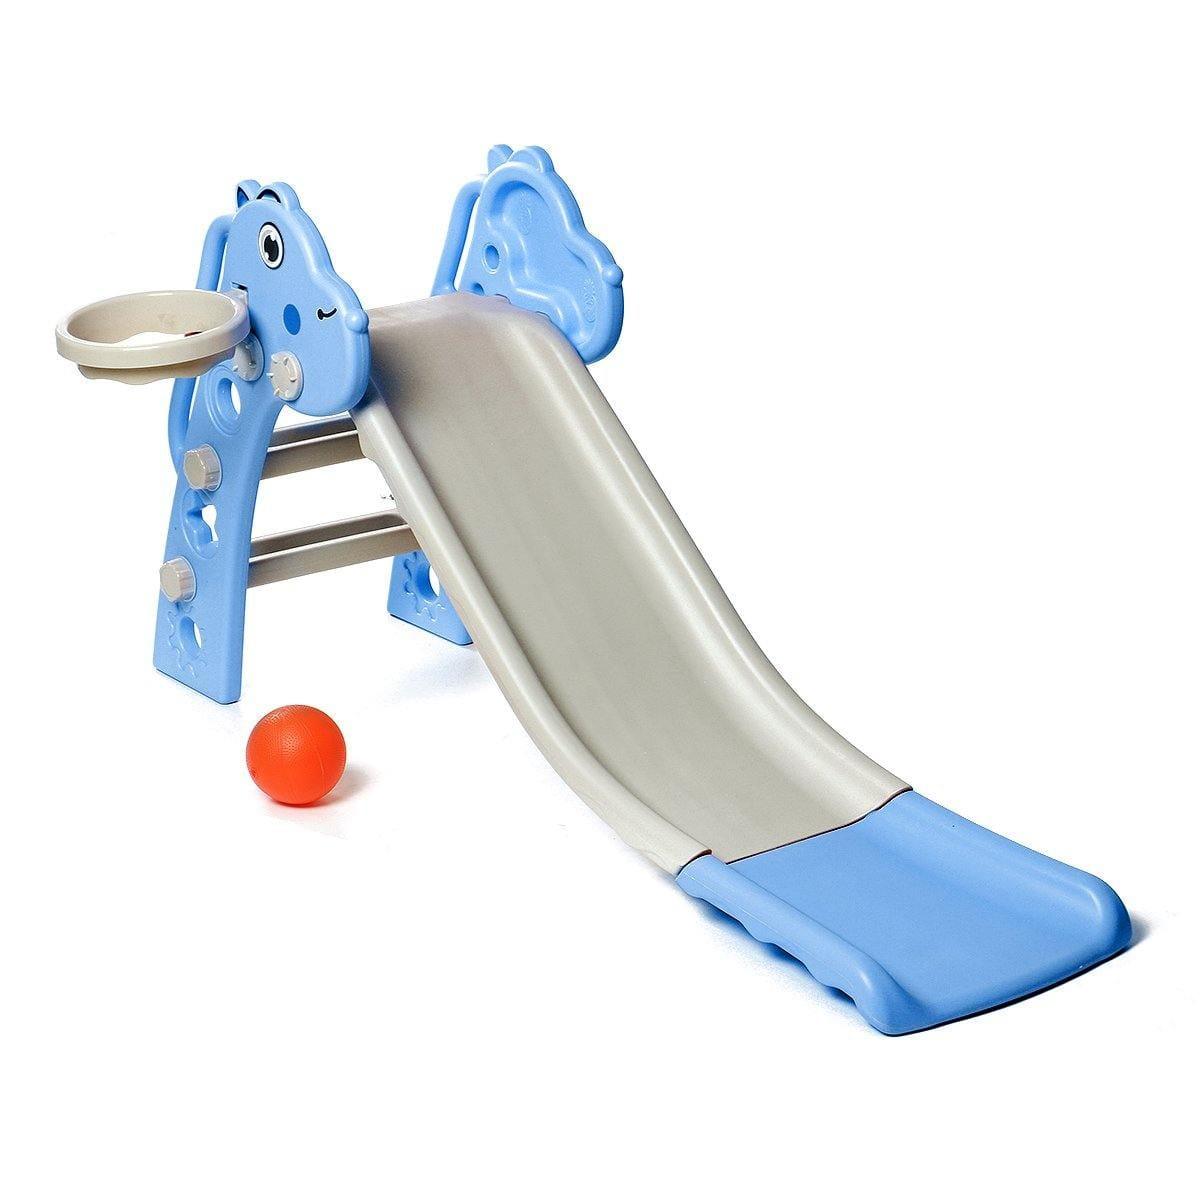 ezy2find toy slide Blue Baby Children Kid Long Slide Play Climber Household Indoor/Outdoor Playground Kids Toys